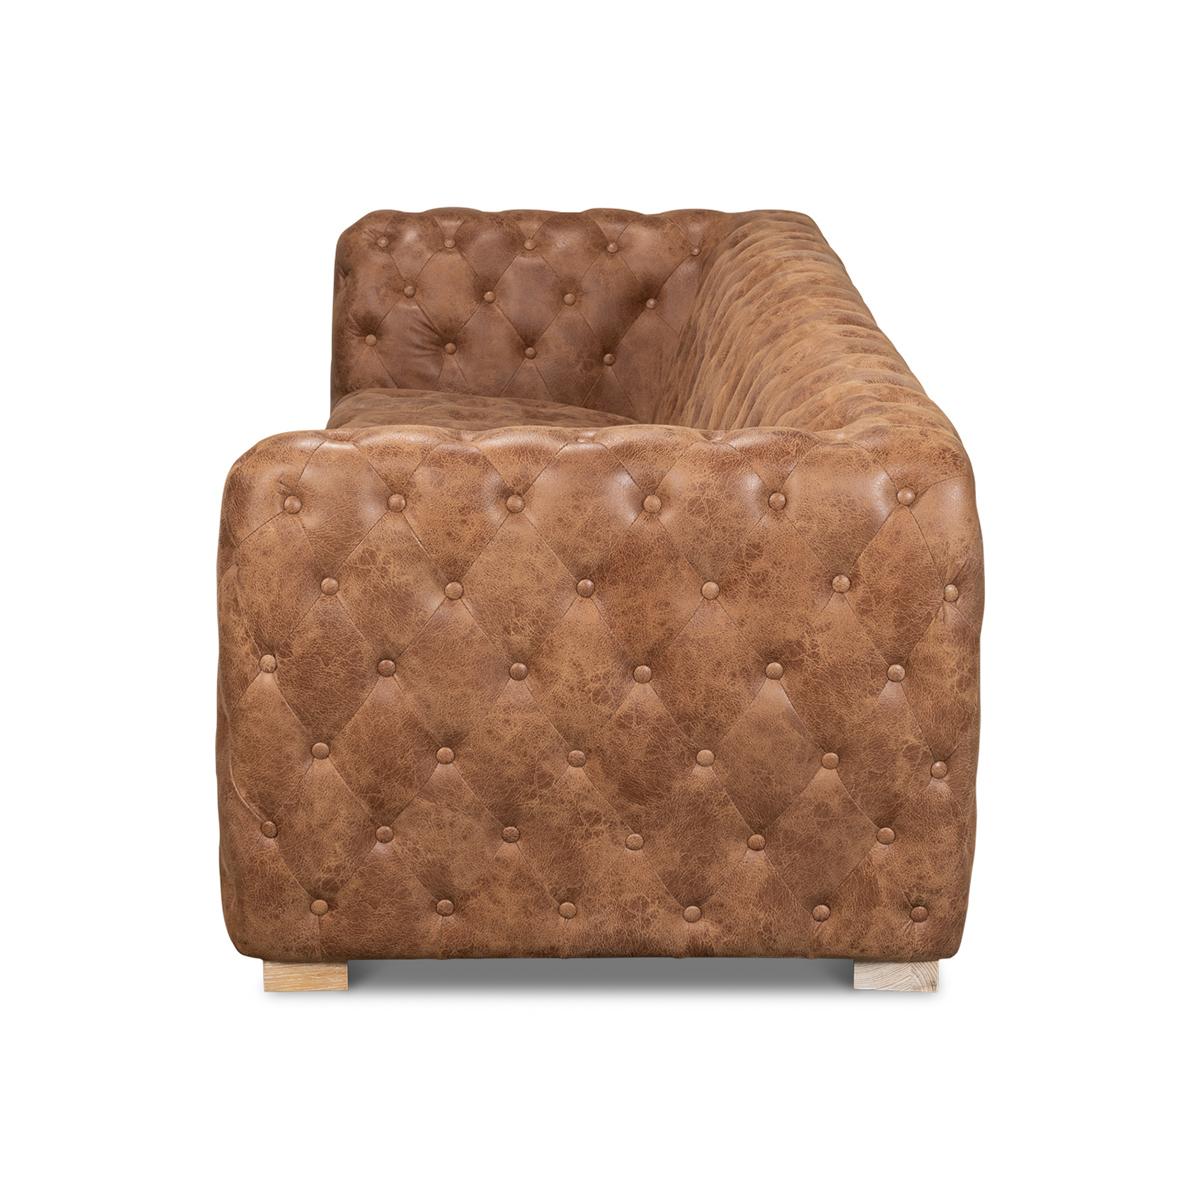 Asian Contemporary Tufted Leather Sofa For Sale